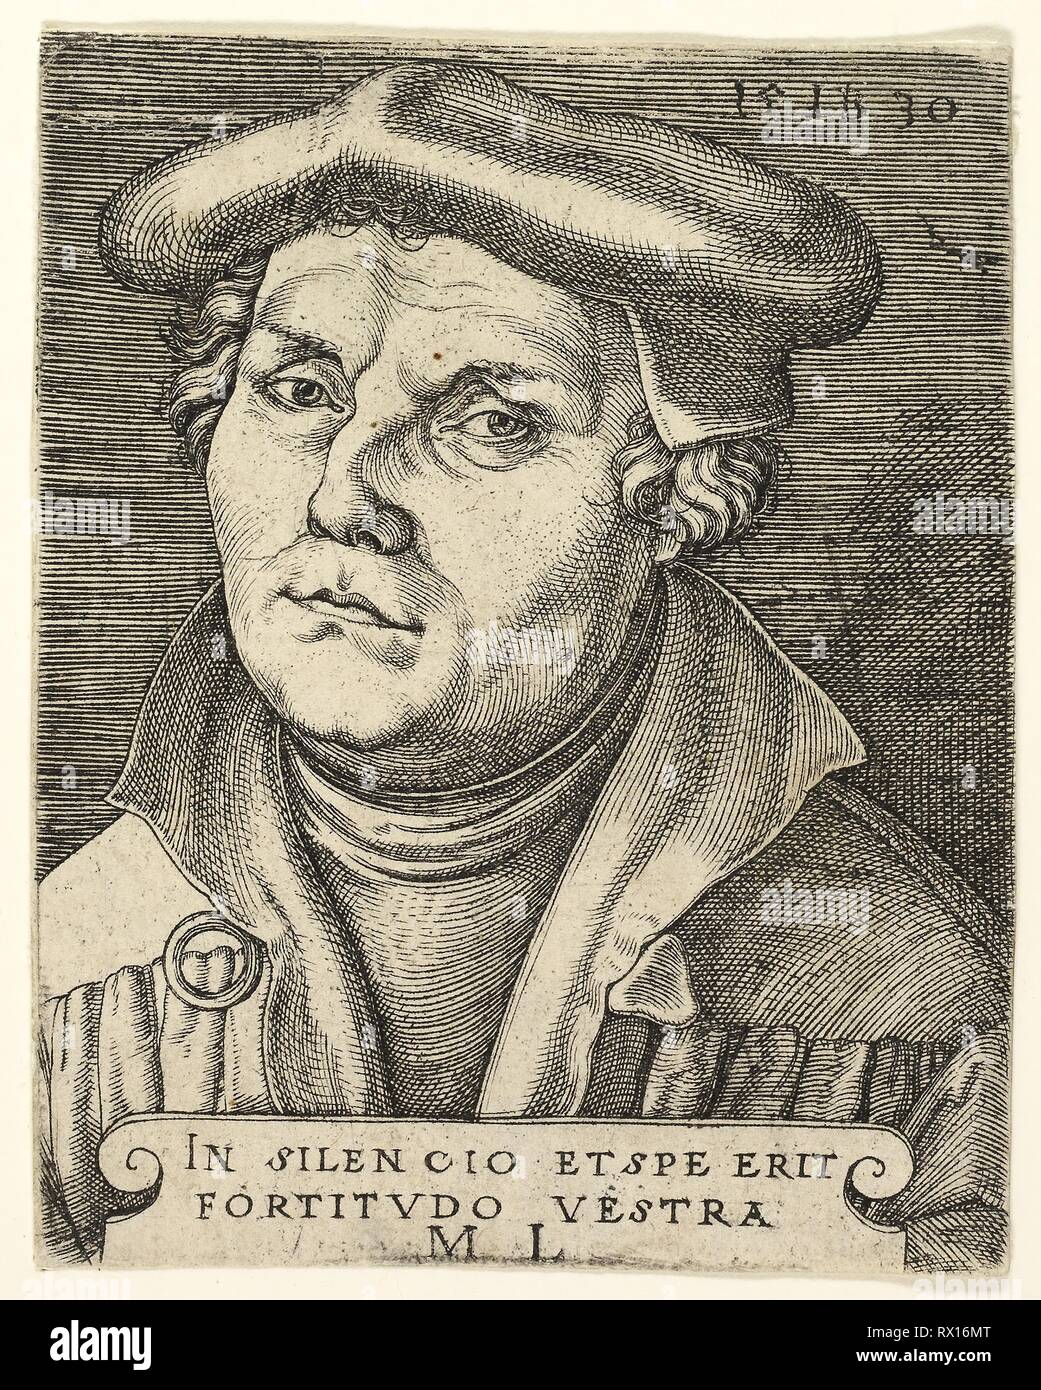 Portrait of Martin Luther. Master I.B.; German, died 1525/30. Date: 1530. Dimensions: 85 x 70 mm (sheet). Engraving in black on paper. Origin: Germany. Museum: The Chicago Art Institute. Stock Photo